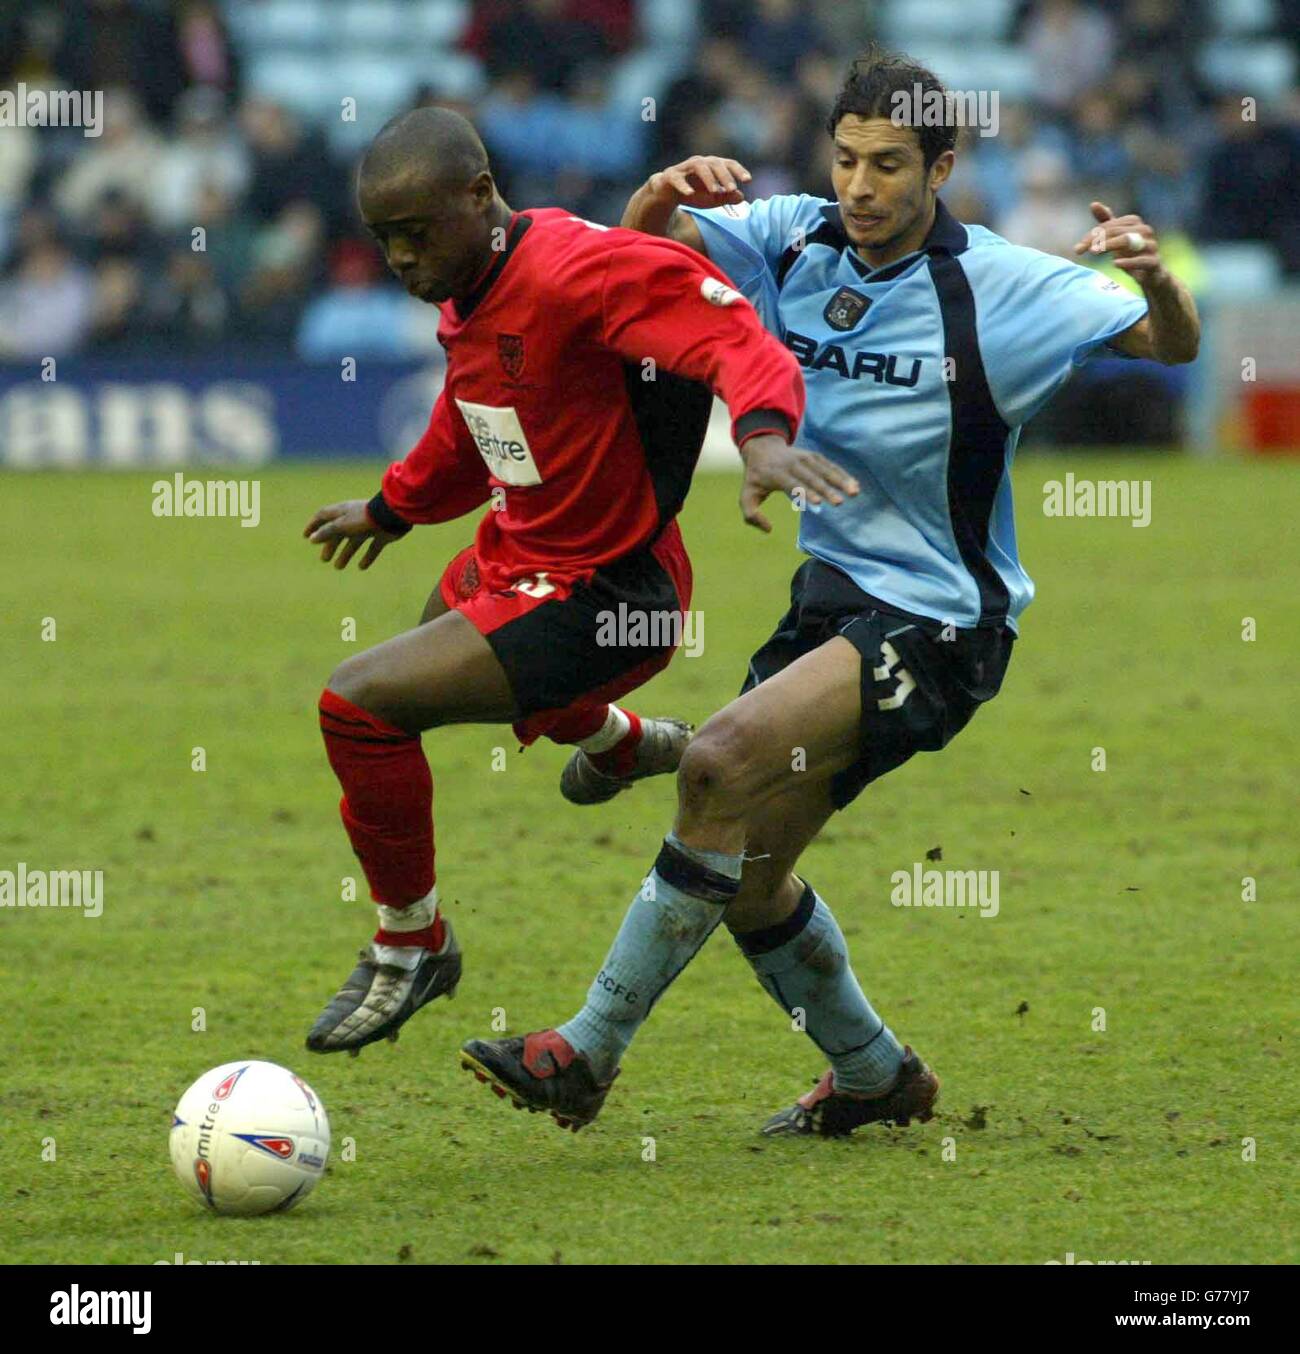 Damien Francis of Wimbledon evades the challenge from Youssef Chippo of Coventry City , during the Nationwide Division One match at The Highfield Road Stadium, Coventry. NO UNOFFICIAL CLUB WEBSITE USE. Stock Photo